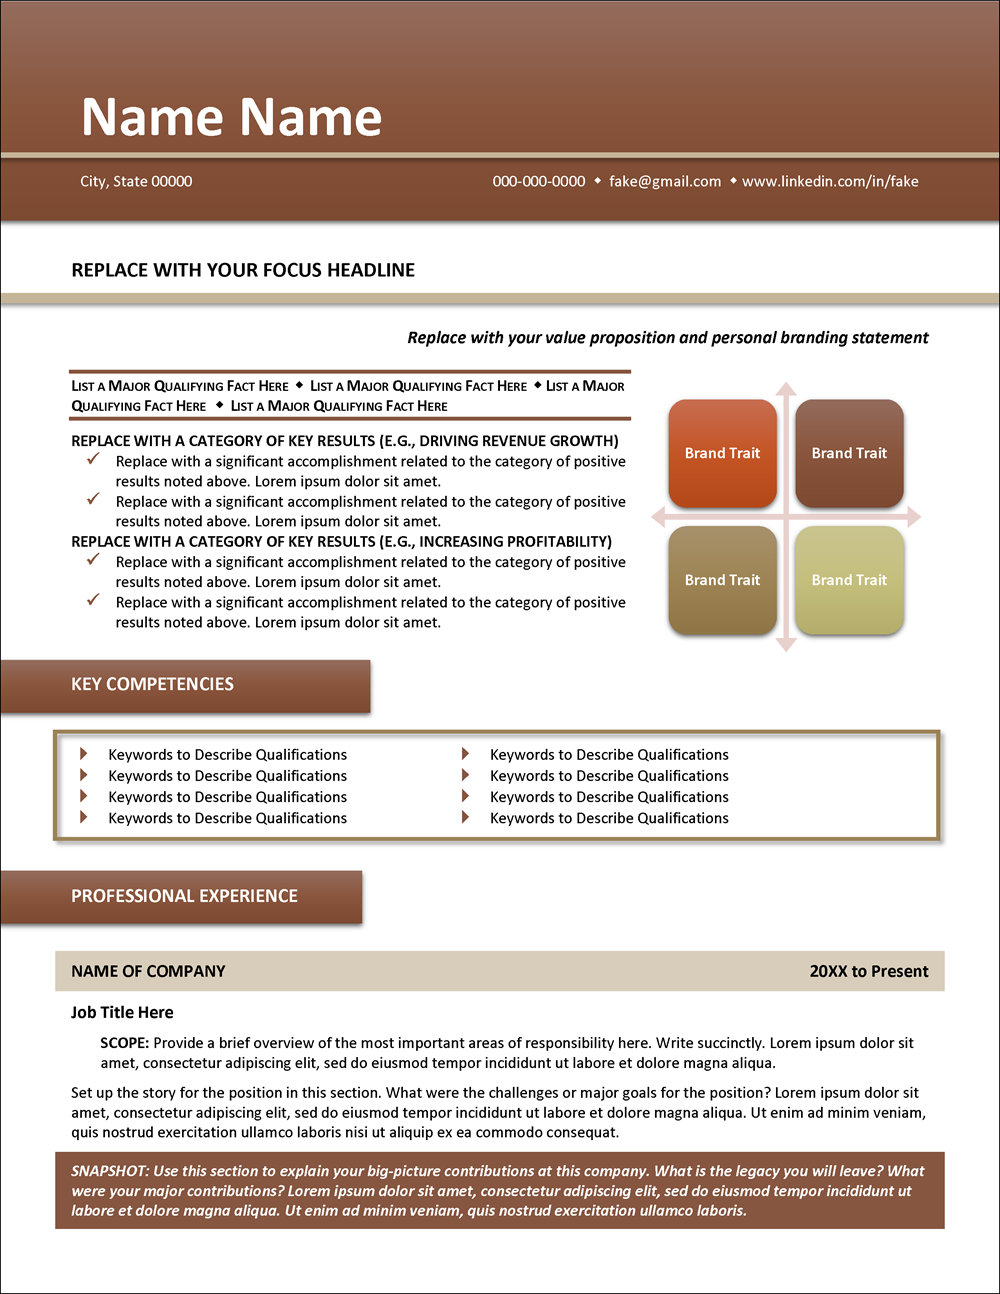 Infographic-Style Resume Template Page 1